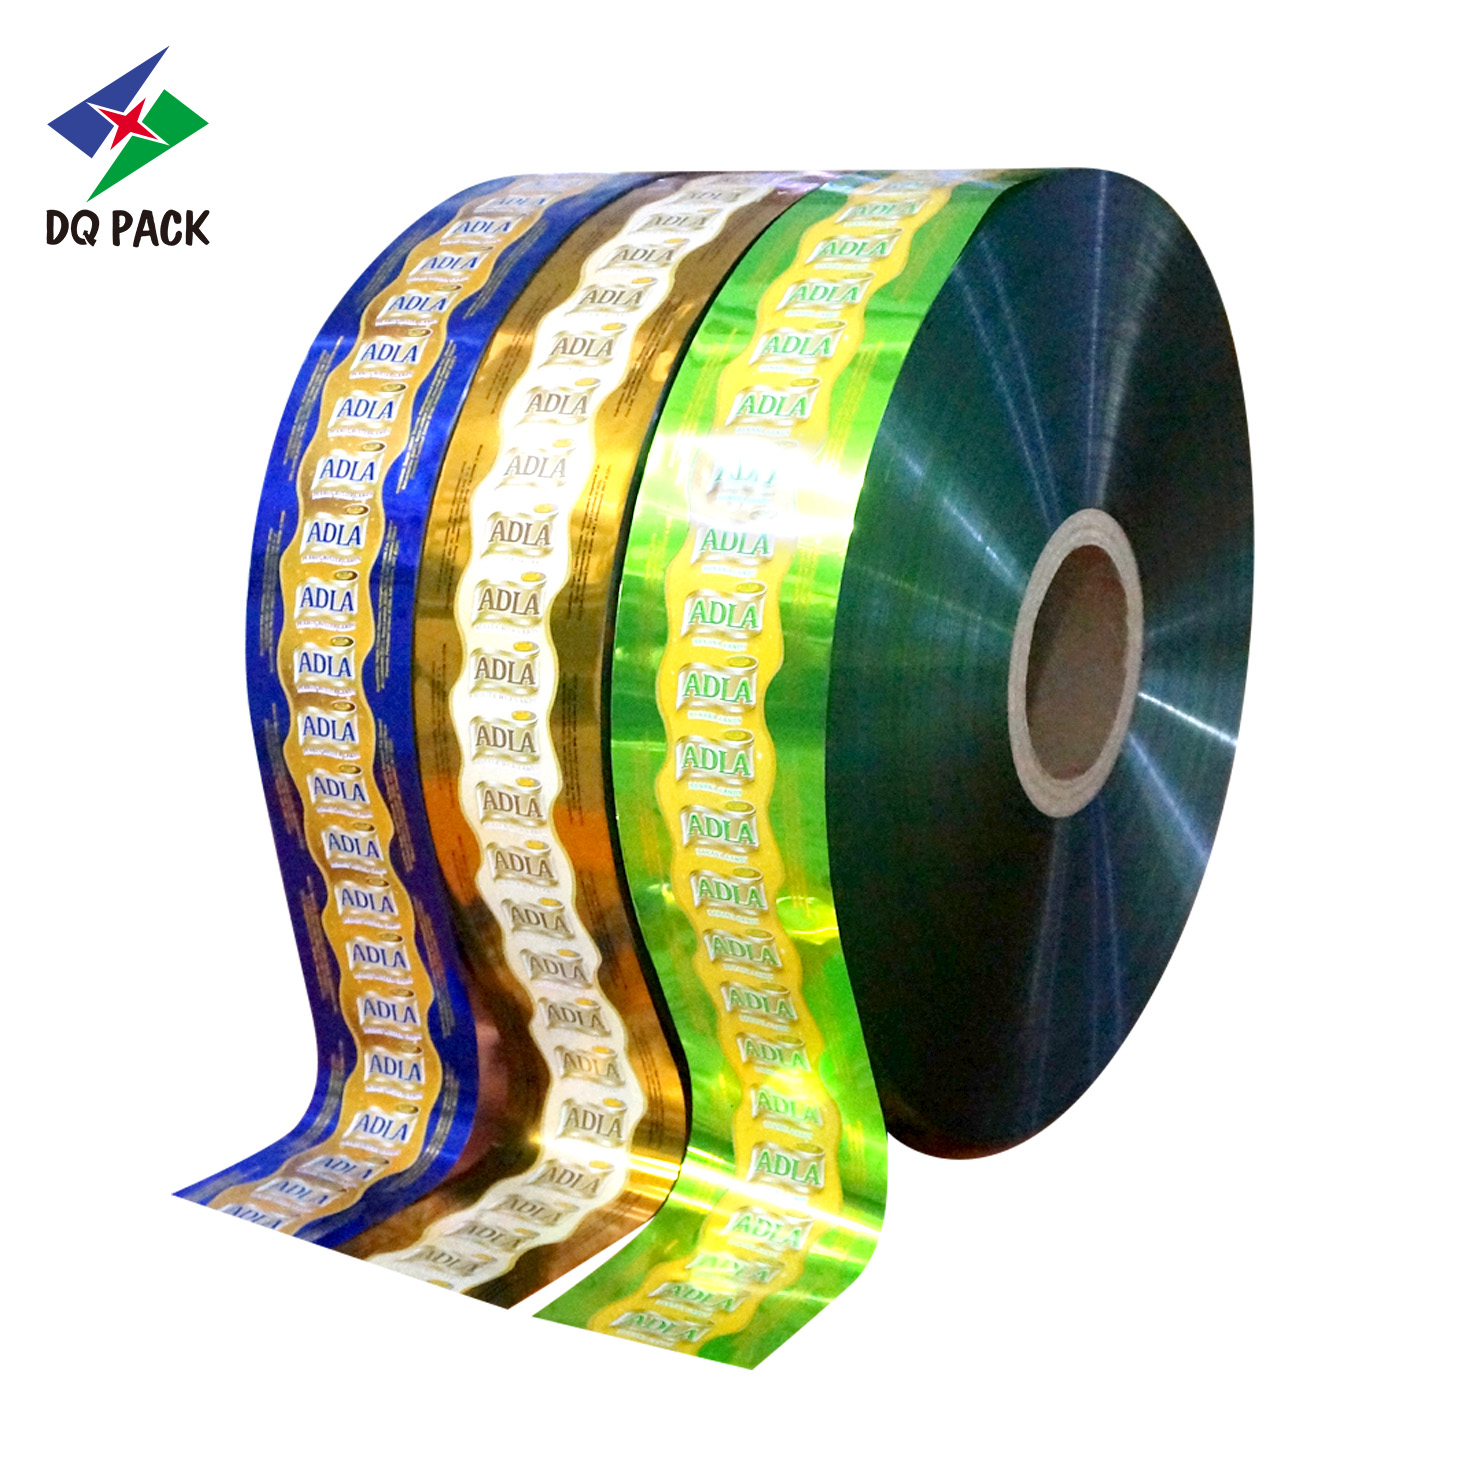 DQPACK custom Printed Roll Laminated Plastic Roll film PET Twisted Flim for Candy